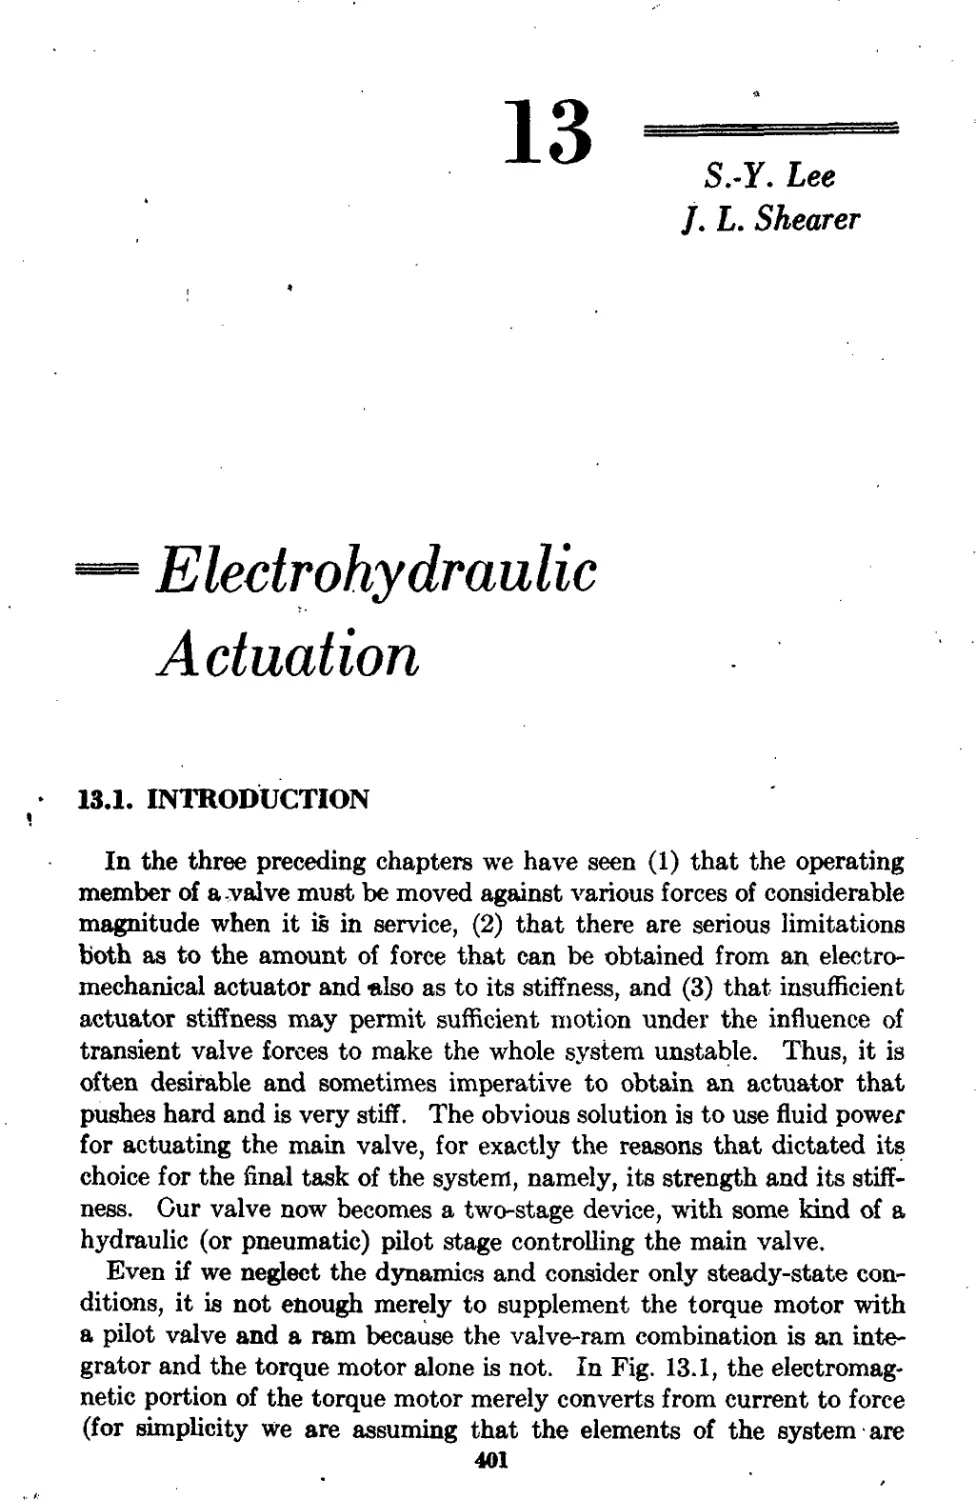 Chapter 13 Electrohydraulic Actuation: S.-Y. Lee and J. Li Shearer